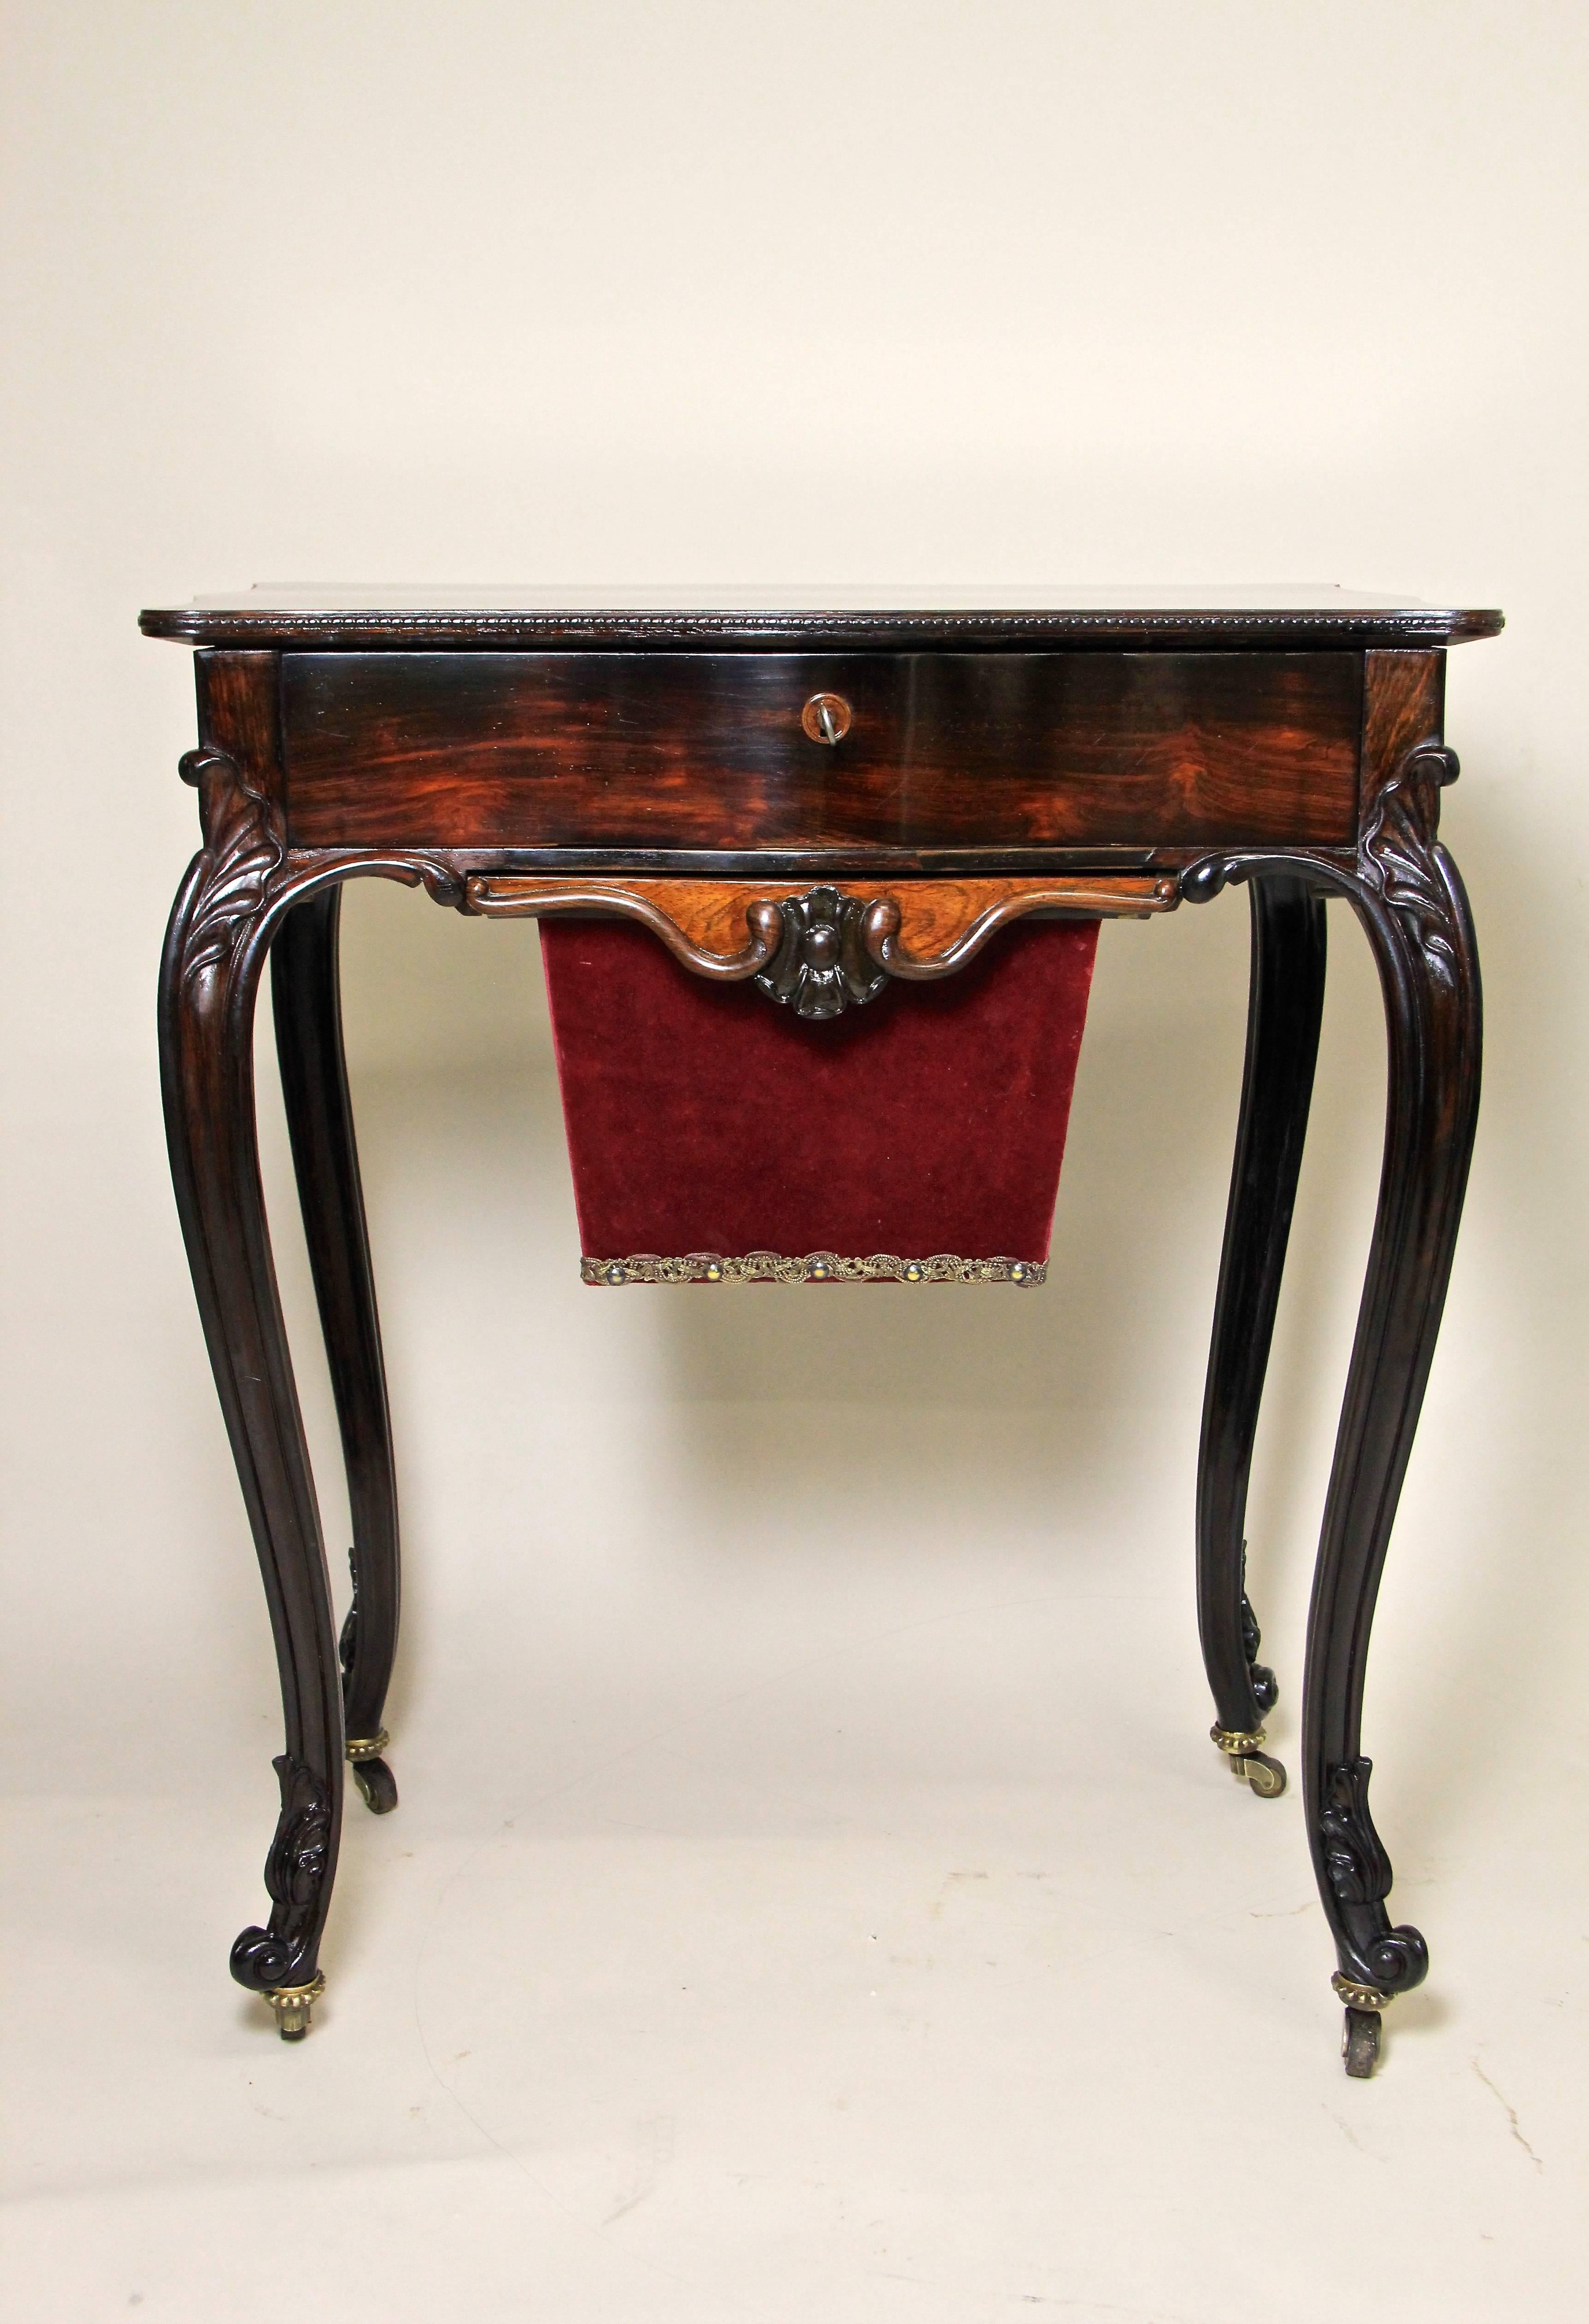 Absolute Gorgeous Louis Philippe side table or sewing table from around 1870. The beautiful carved delicate solid nut wood table legs combined with the amazing veneer work makes this table an absolute eye-catcher. The main drawer consists of six